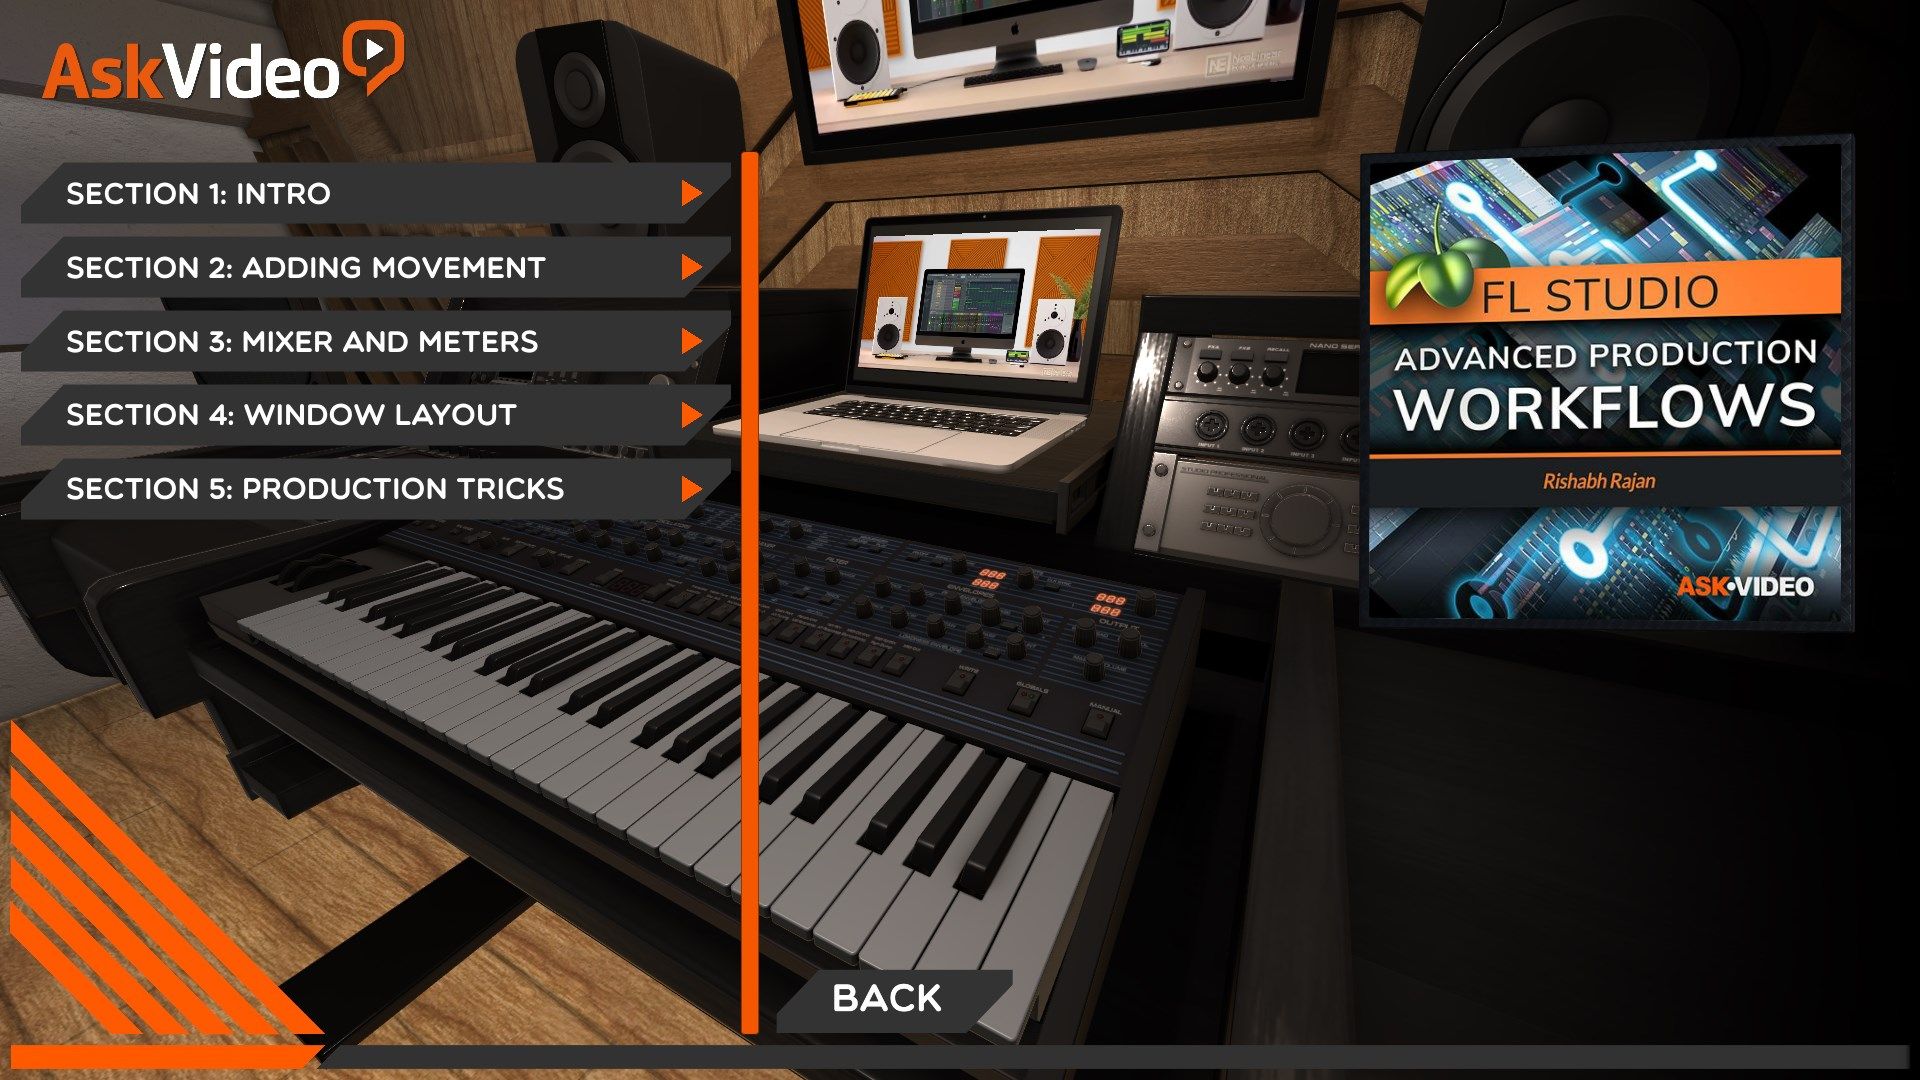 Advanced Production Workflows Course For FL Studio